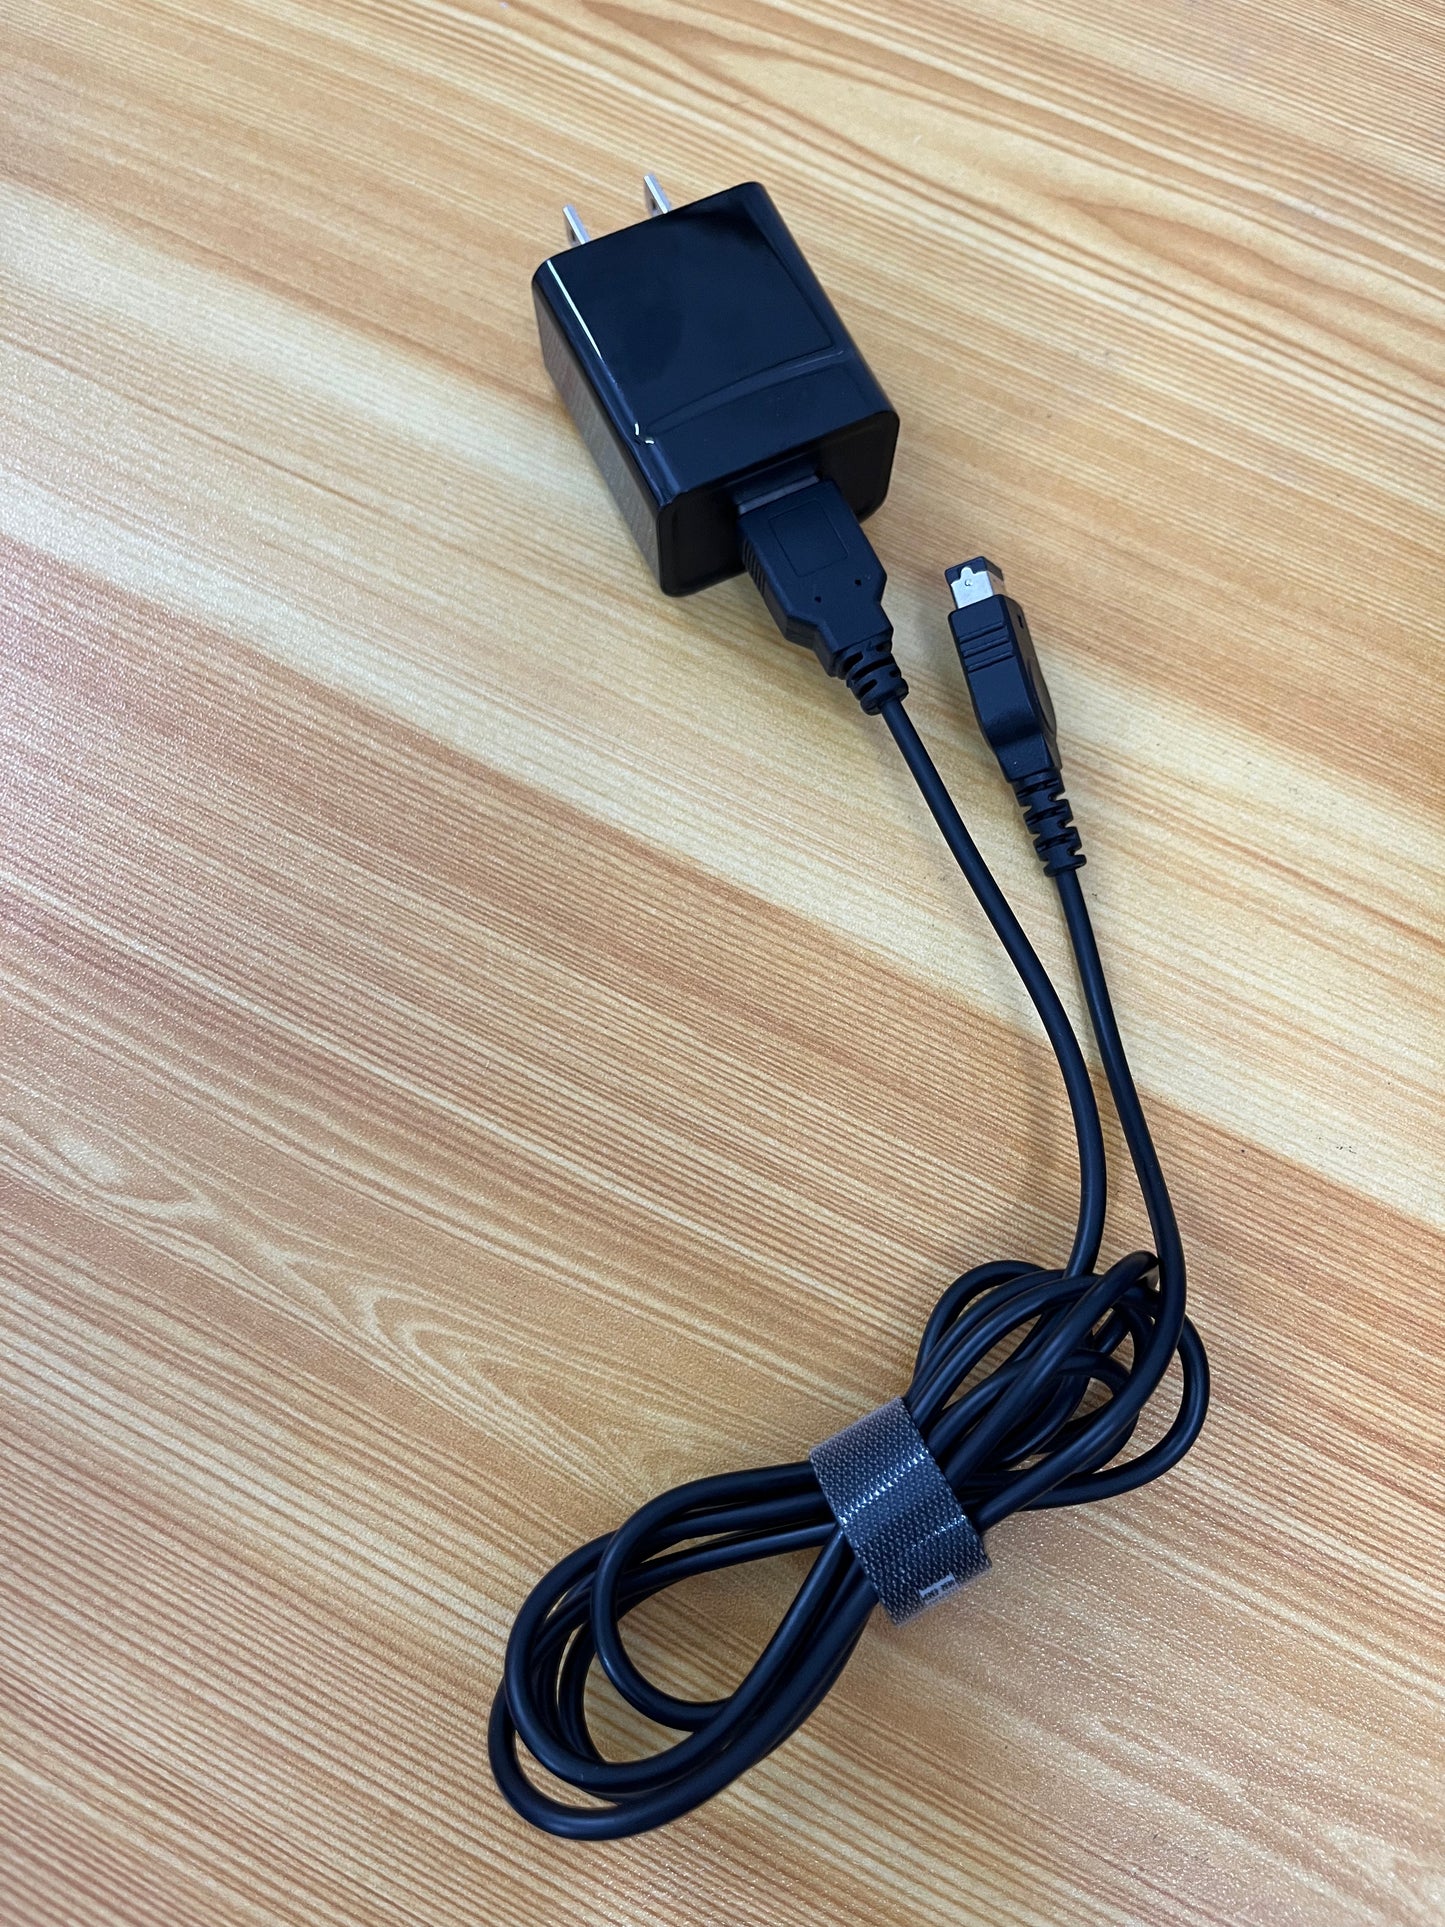 Gameboy Advance SP Charger, with 3.9 feet USB Cable, Black